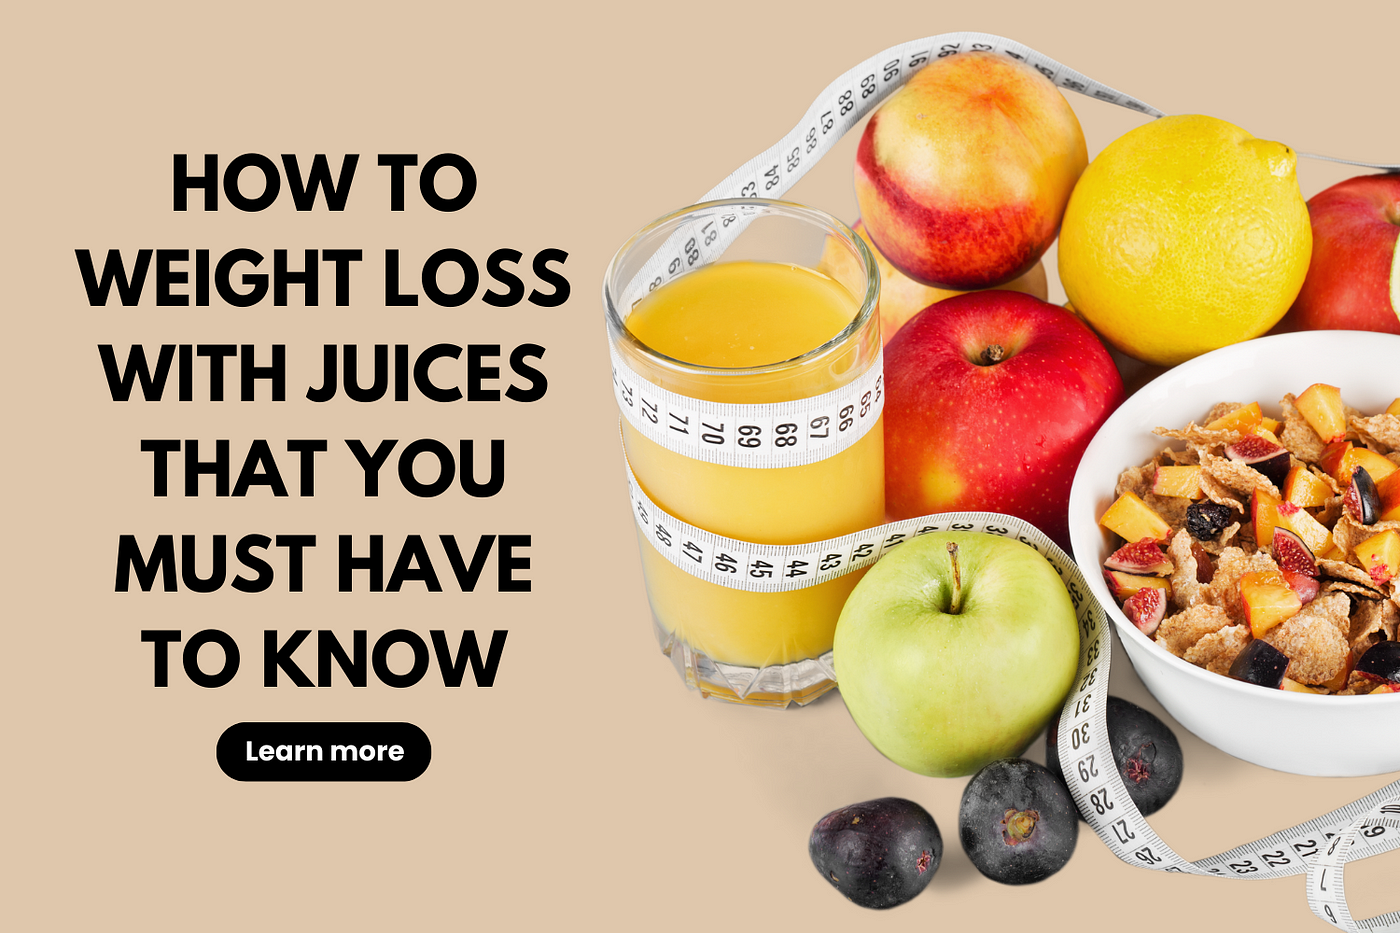 How to weight loss with juices that you must have to know, by Thai Thanh  Hieu